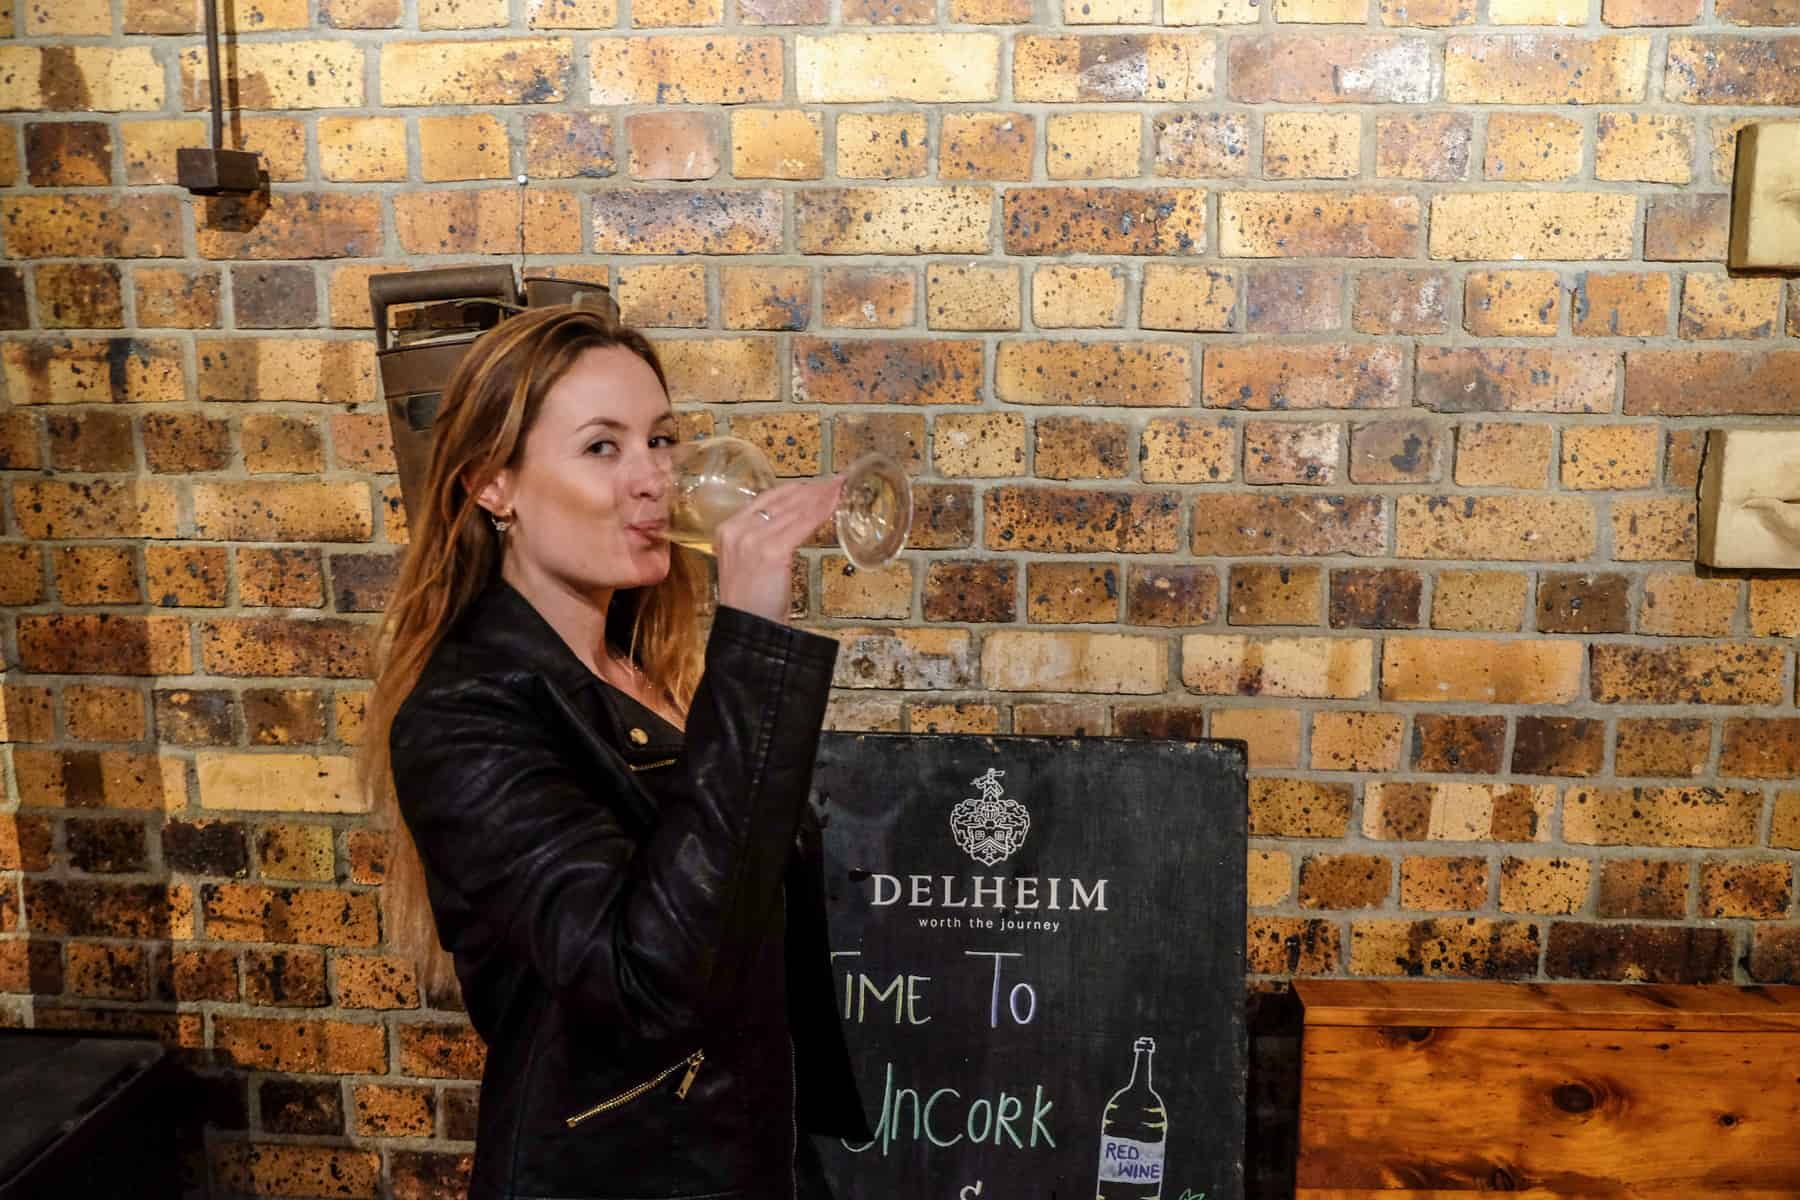 A woman in a black jacket drinks a glass of wine in front of an exposed brick wall. The blackboard sign says 'Time to Uncork' with the logo of Delheim Wine Estate in Stellenbosch